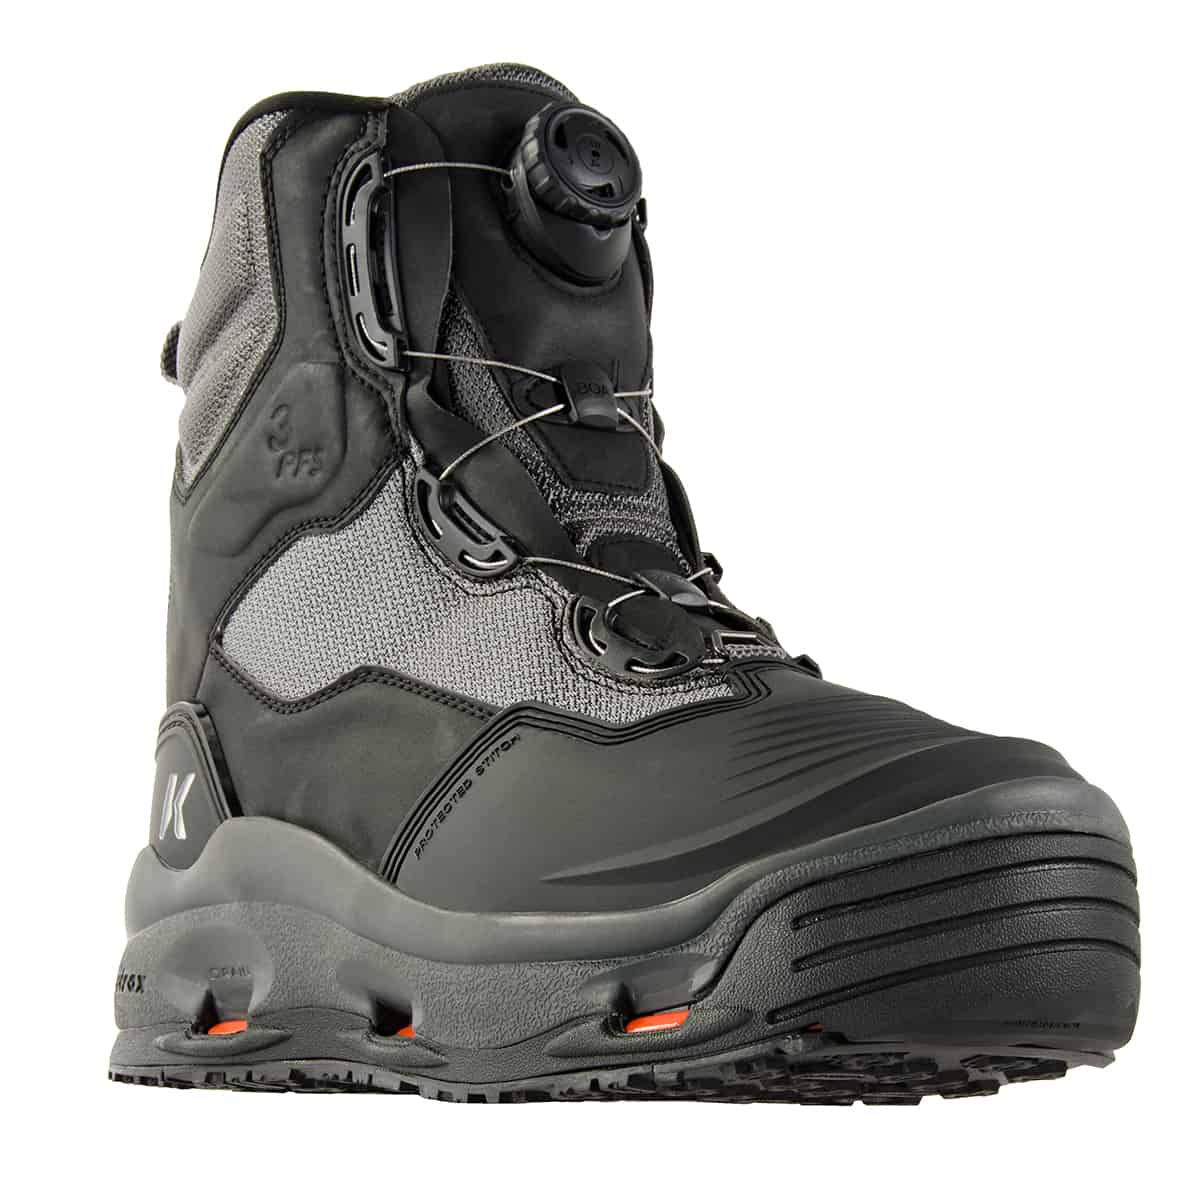 korkers darkhorse wading boot 3qtr front fishing wading boot with boa lacing